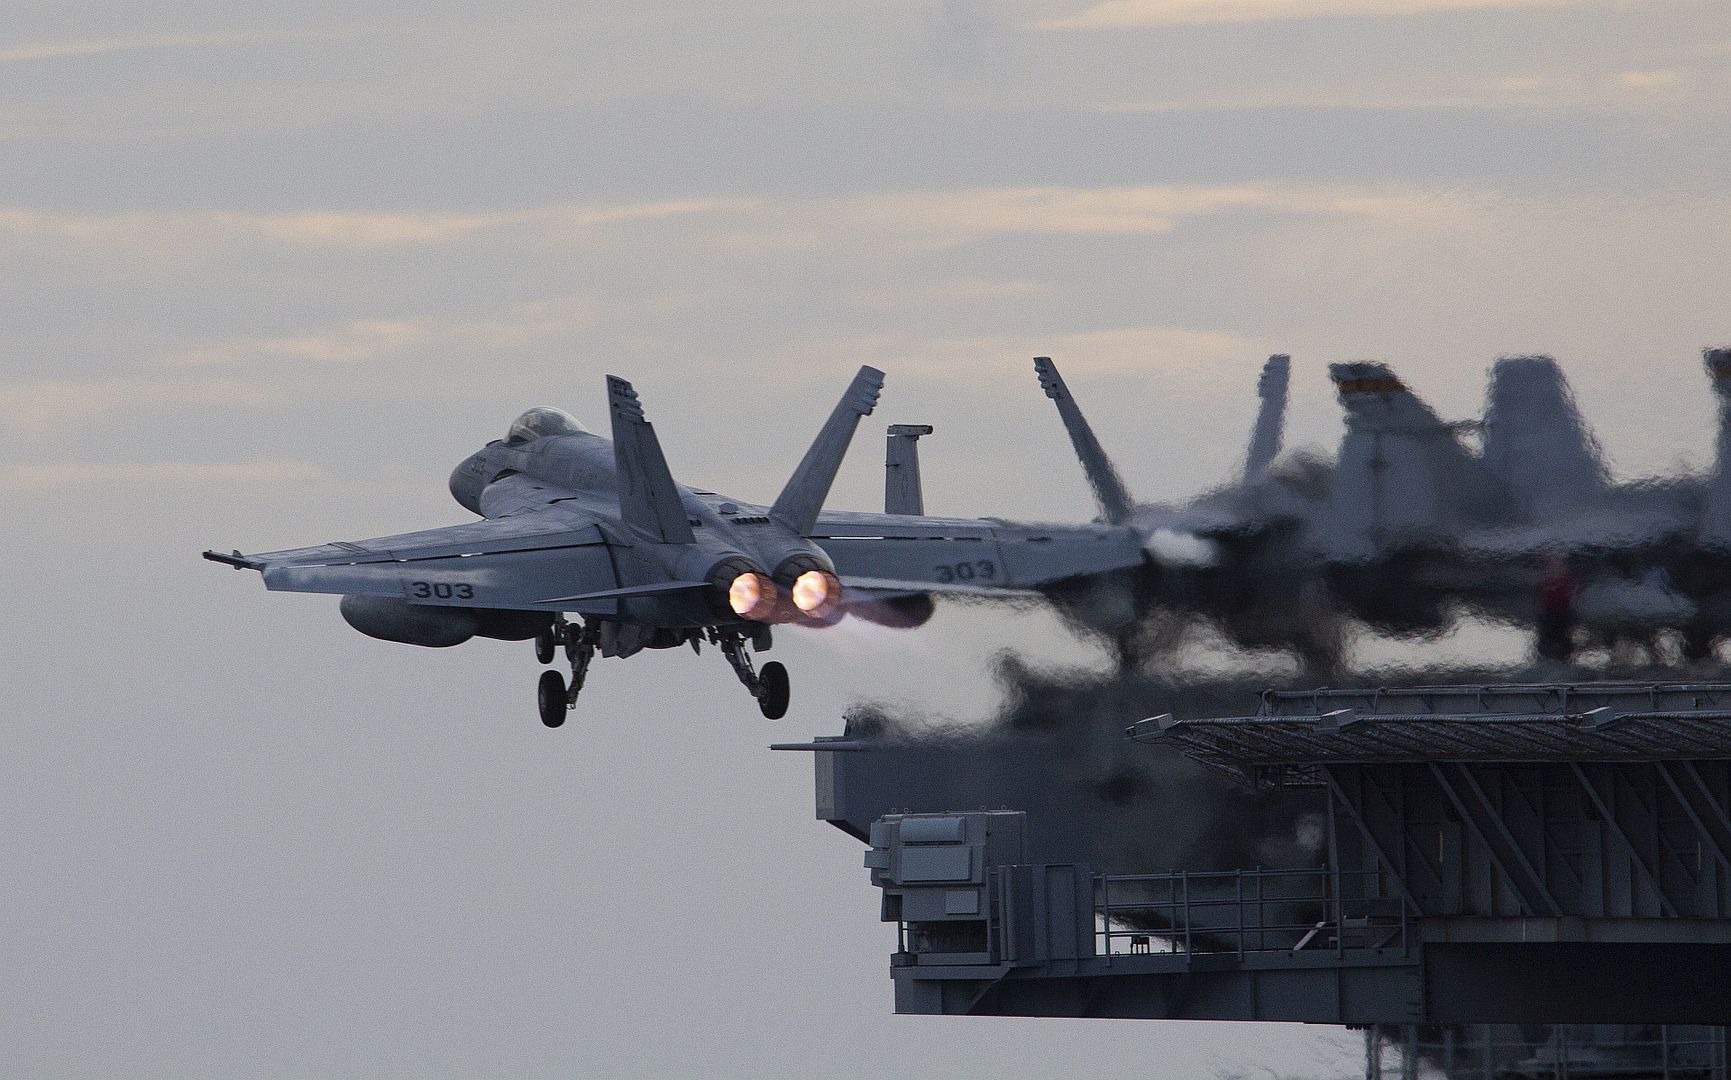 18E Super Hornet From The Kestrels Of Strike Fighter Squadron 137 Launches From The Flight Deck Of The Aircraft Carrier USS Nimitz